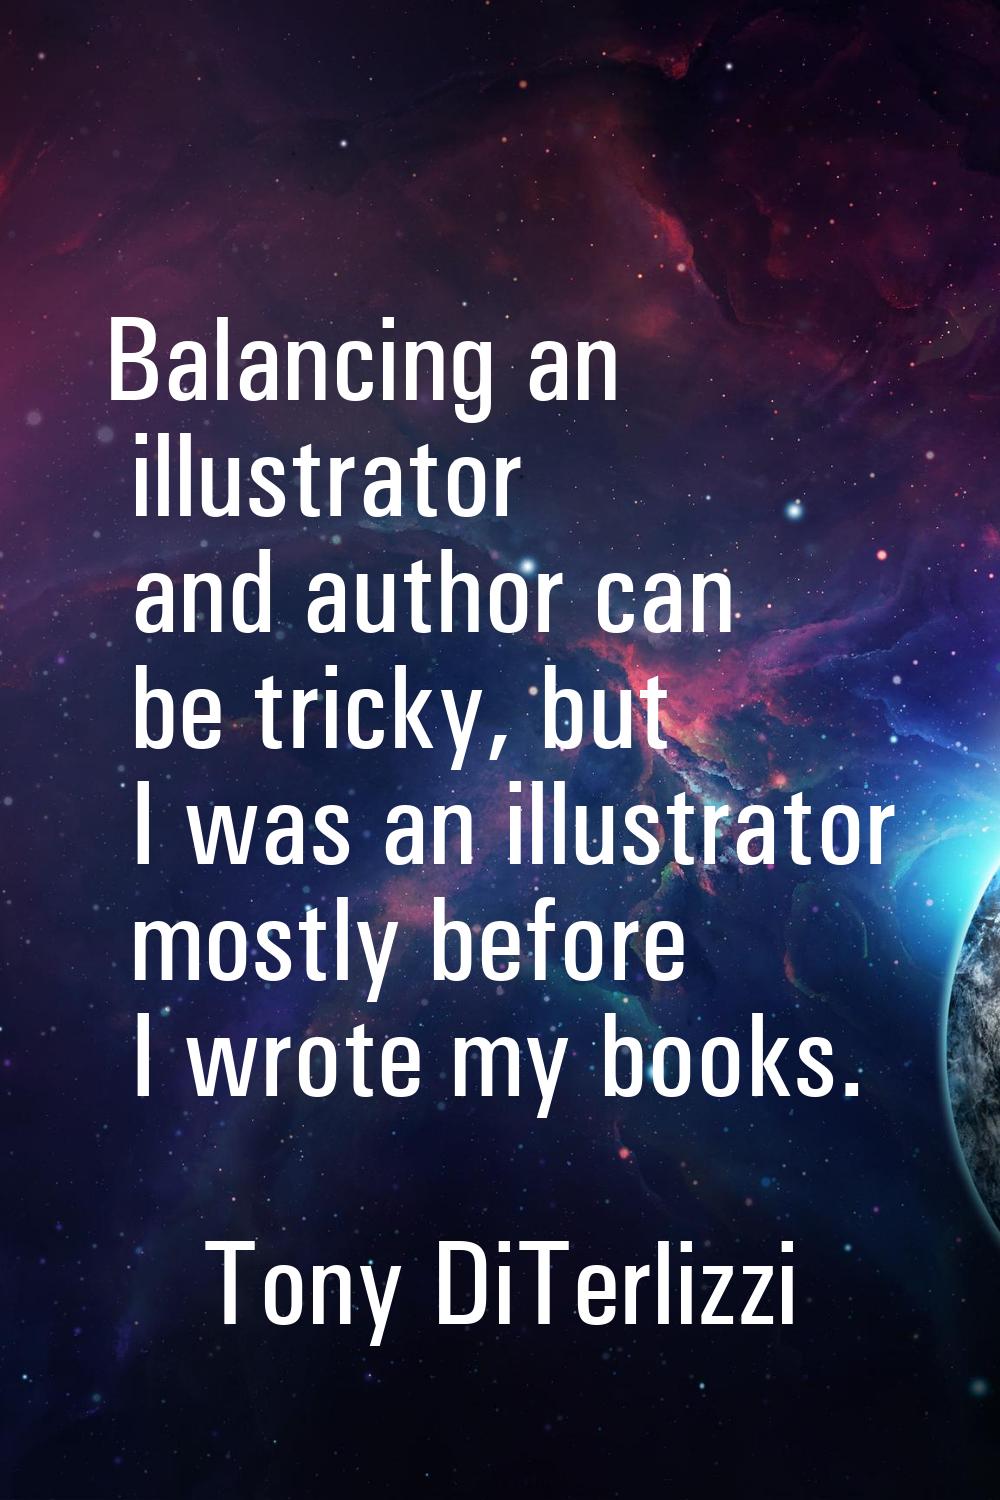 Balancing an illustrator and author can be tricky, but I was an illustrator mostly before I wrote m